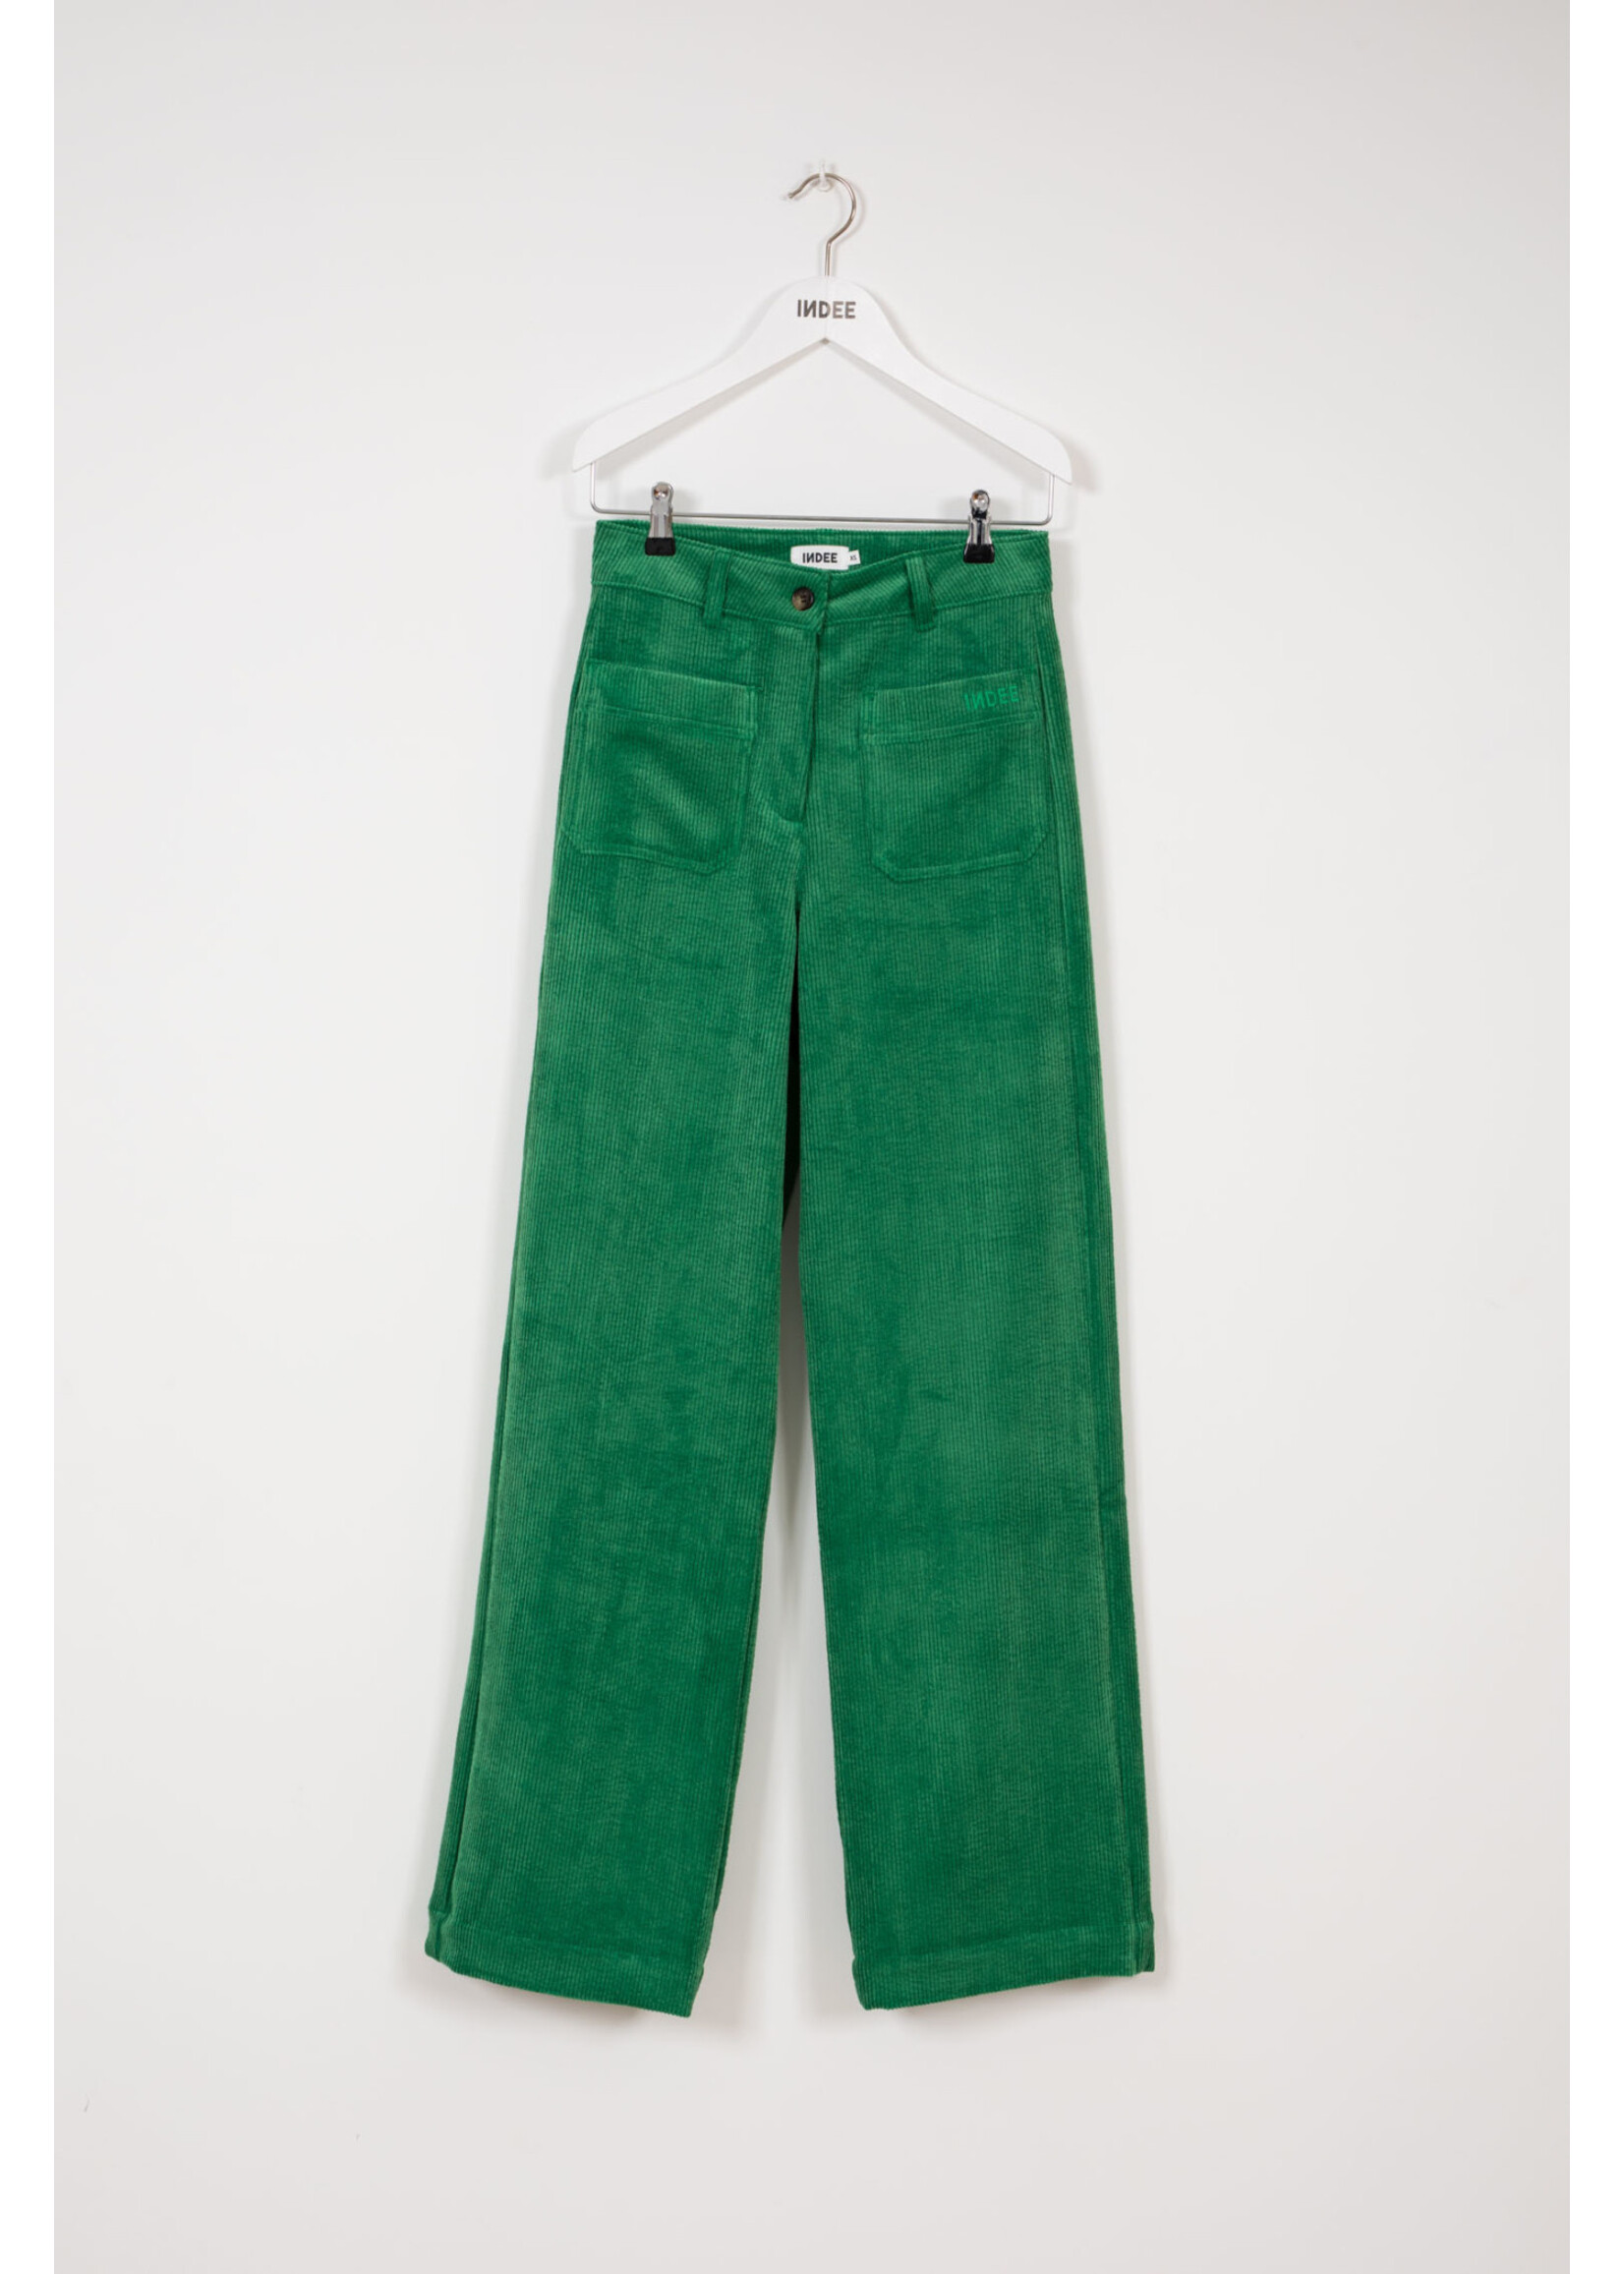 INDEE INDEE Corduroy Trousers Only Green